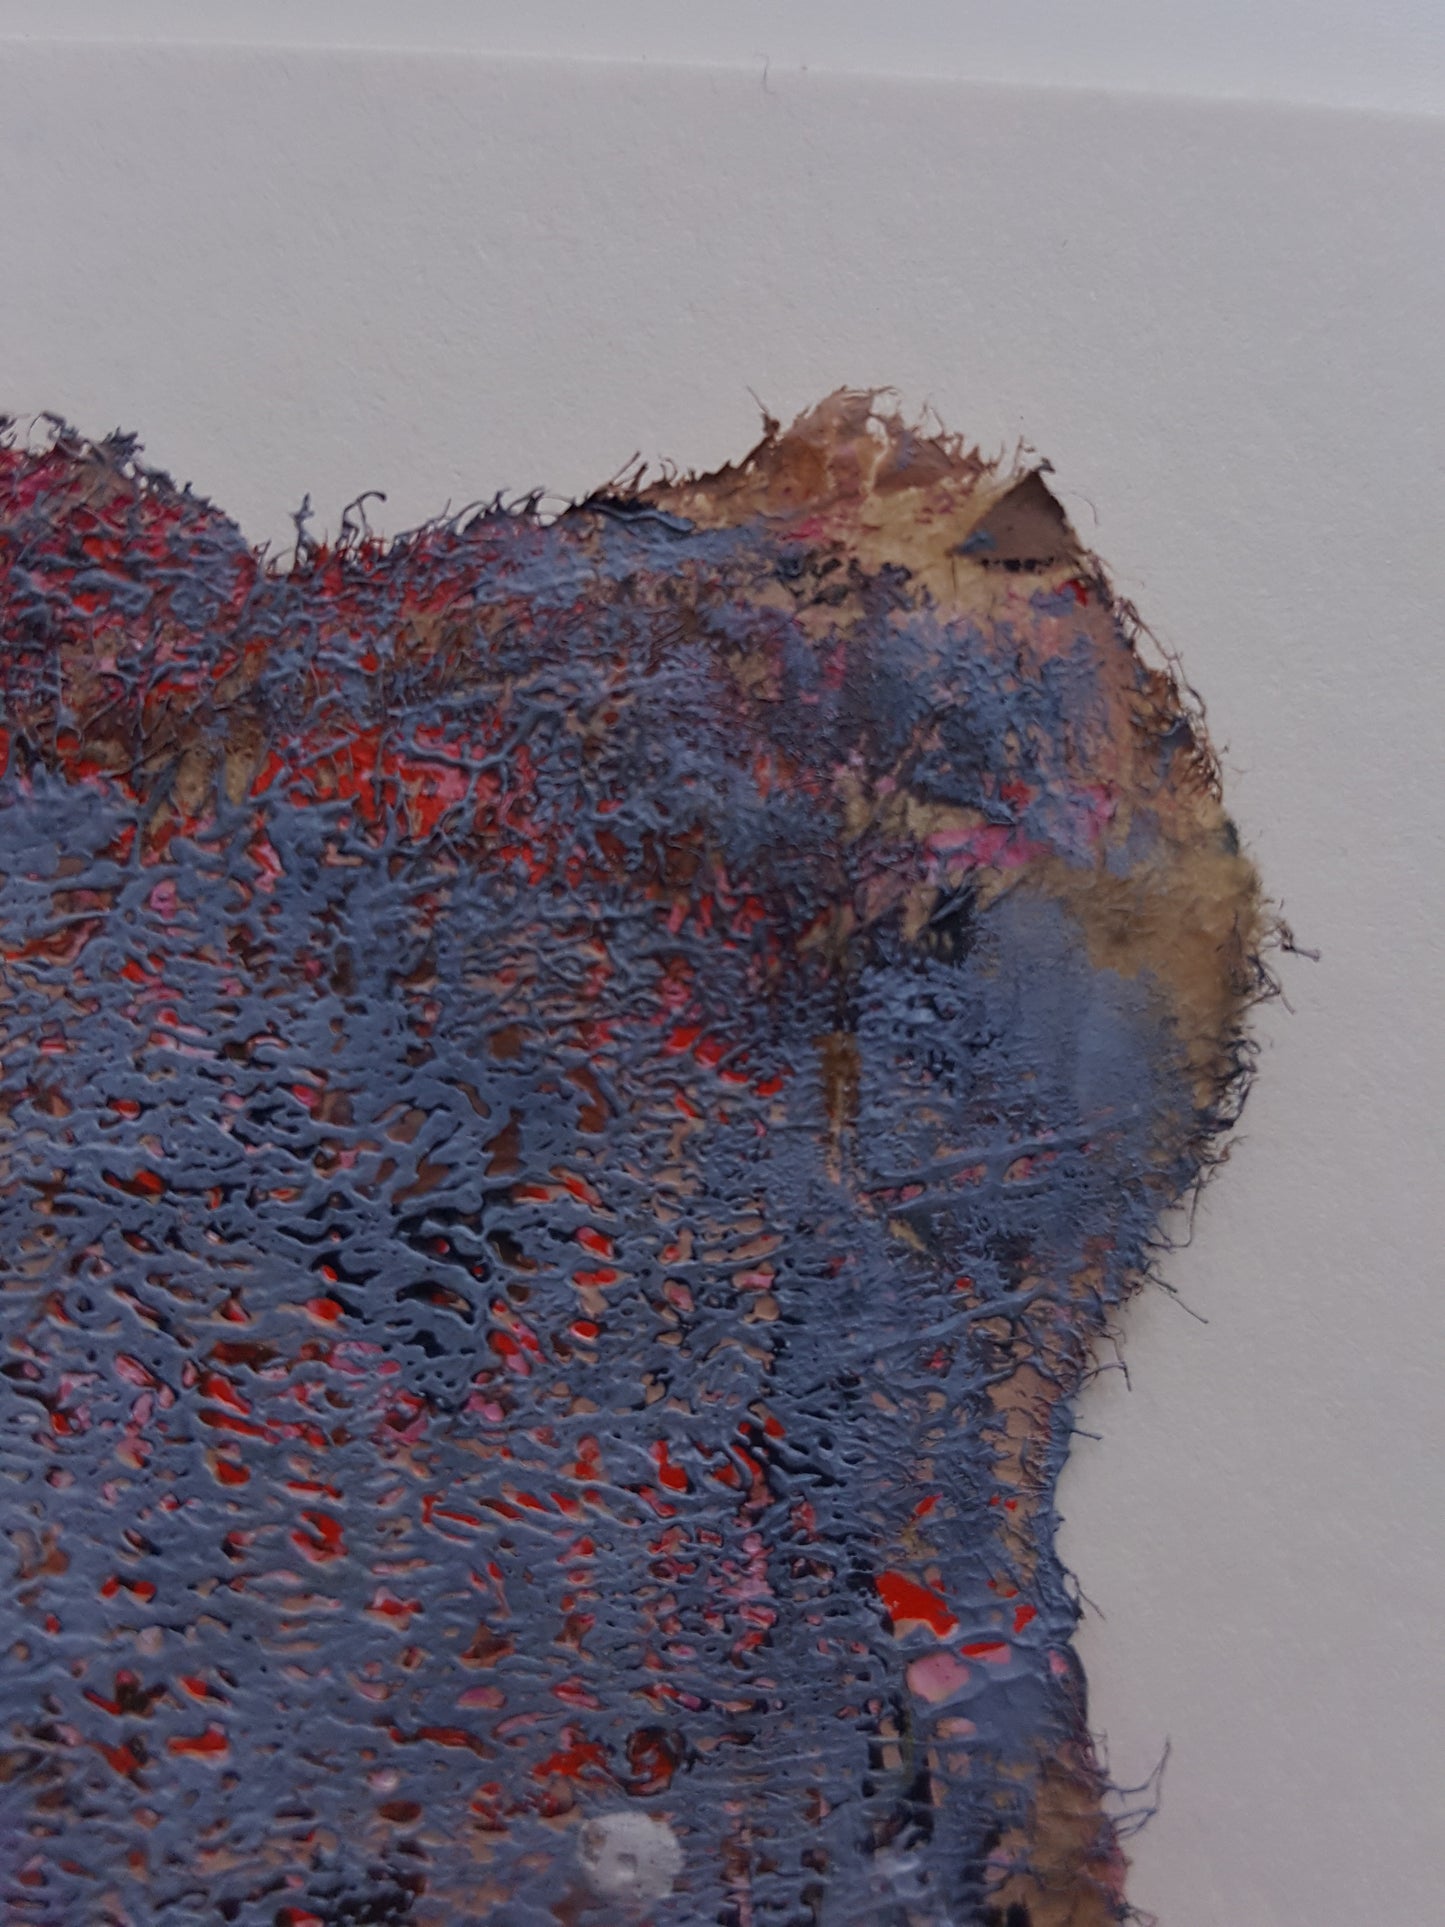 close up of torn edge of painting